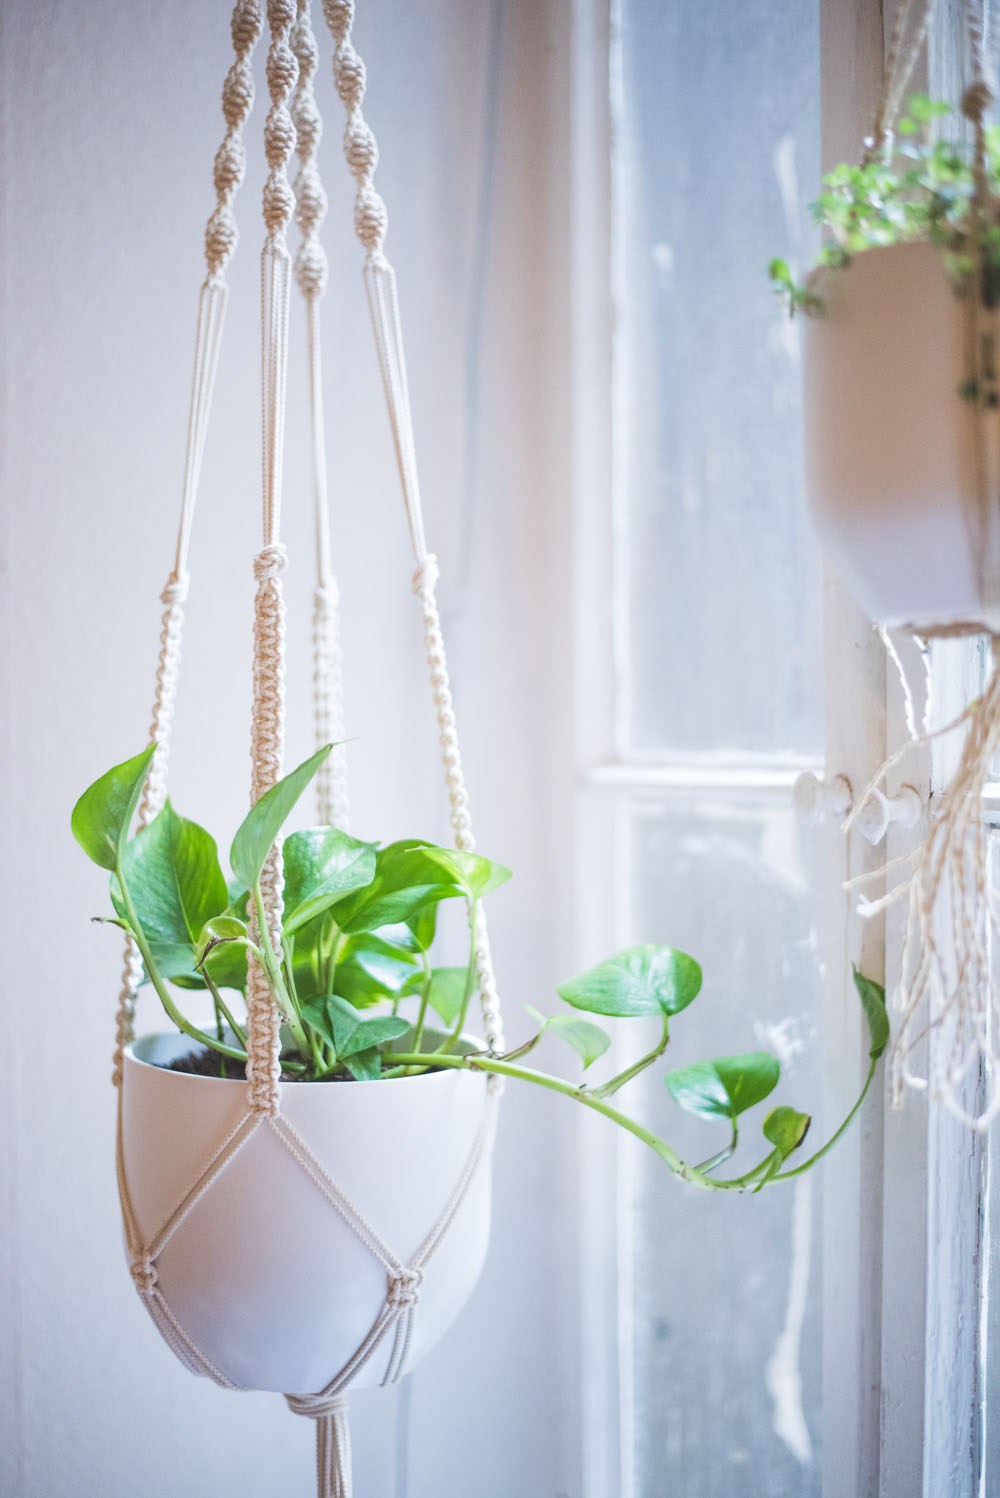 Macrame Plant Hanger Tutorial and other amazing macrame projects!